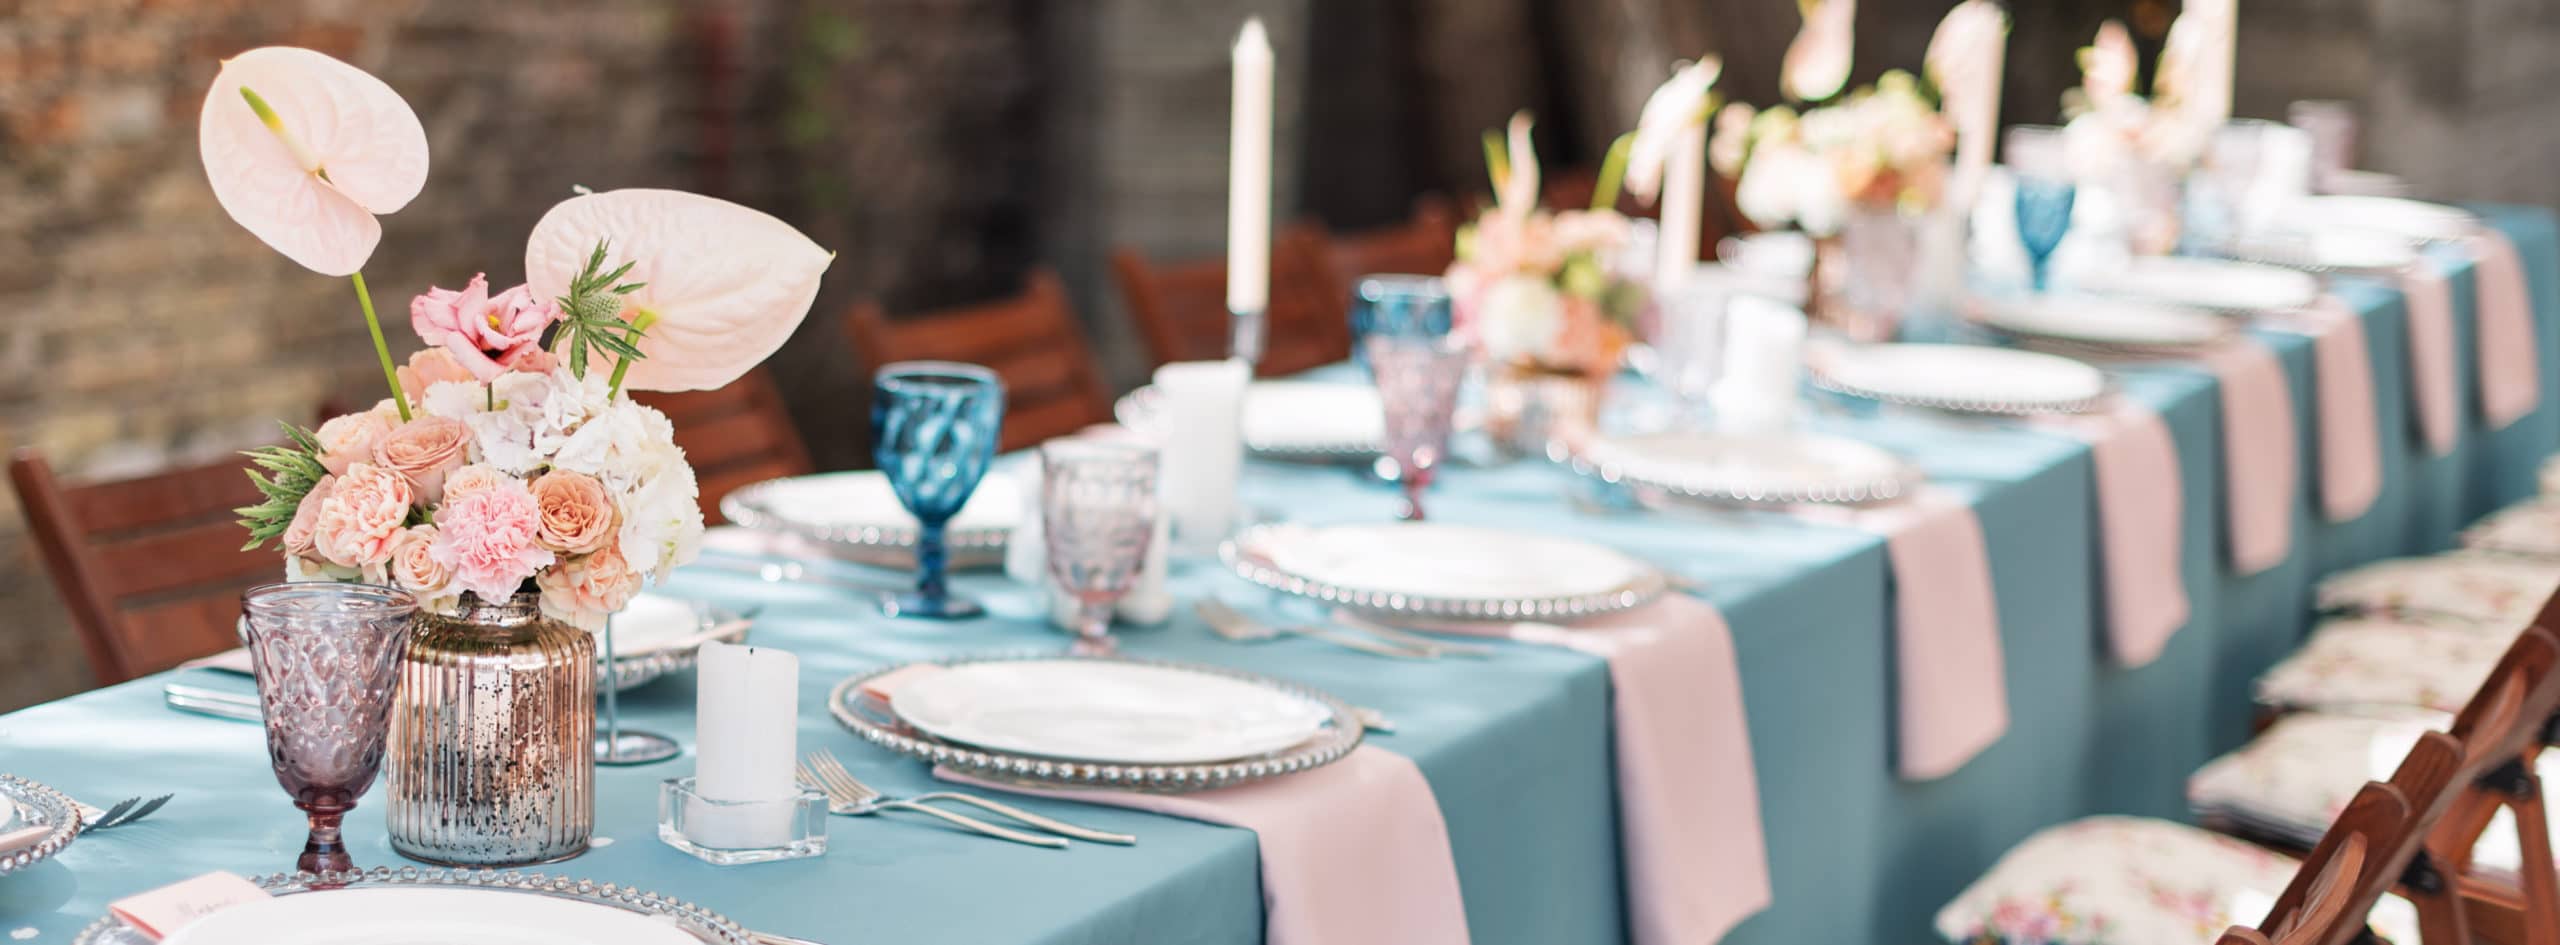 Wedding Table Linens: Choosing the Right Color